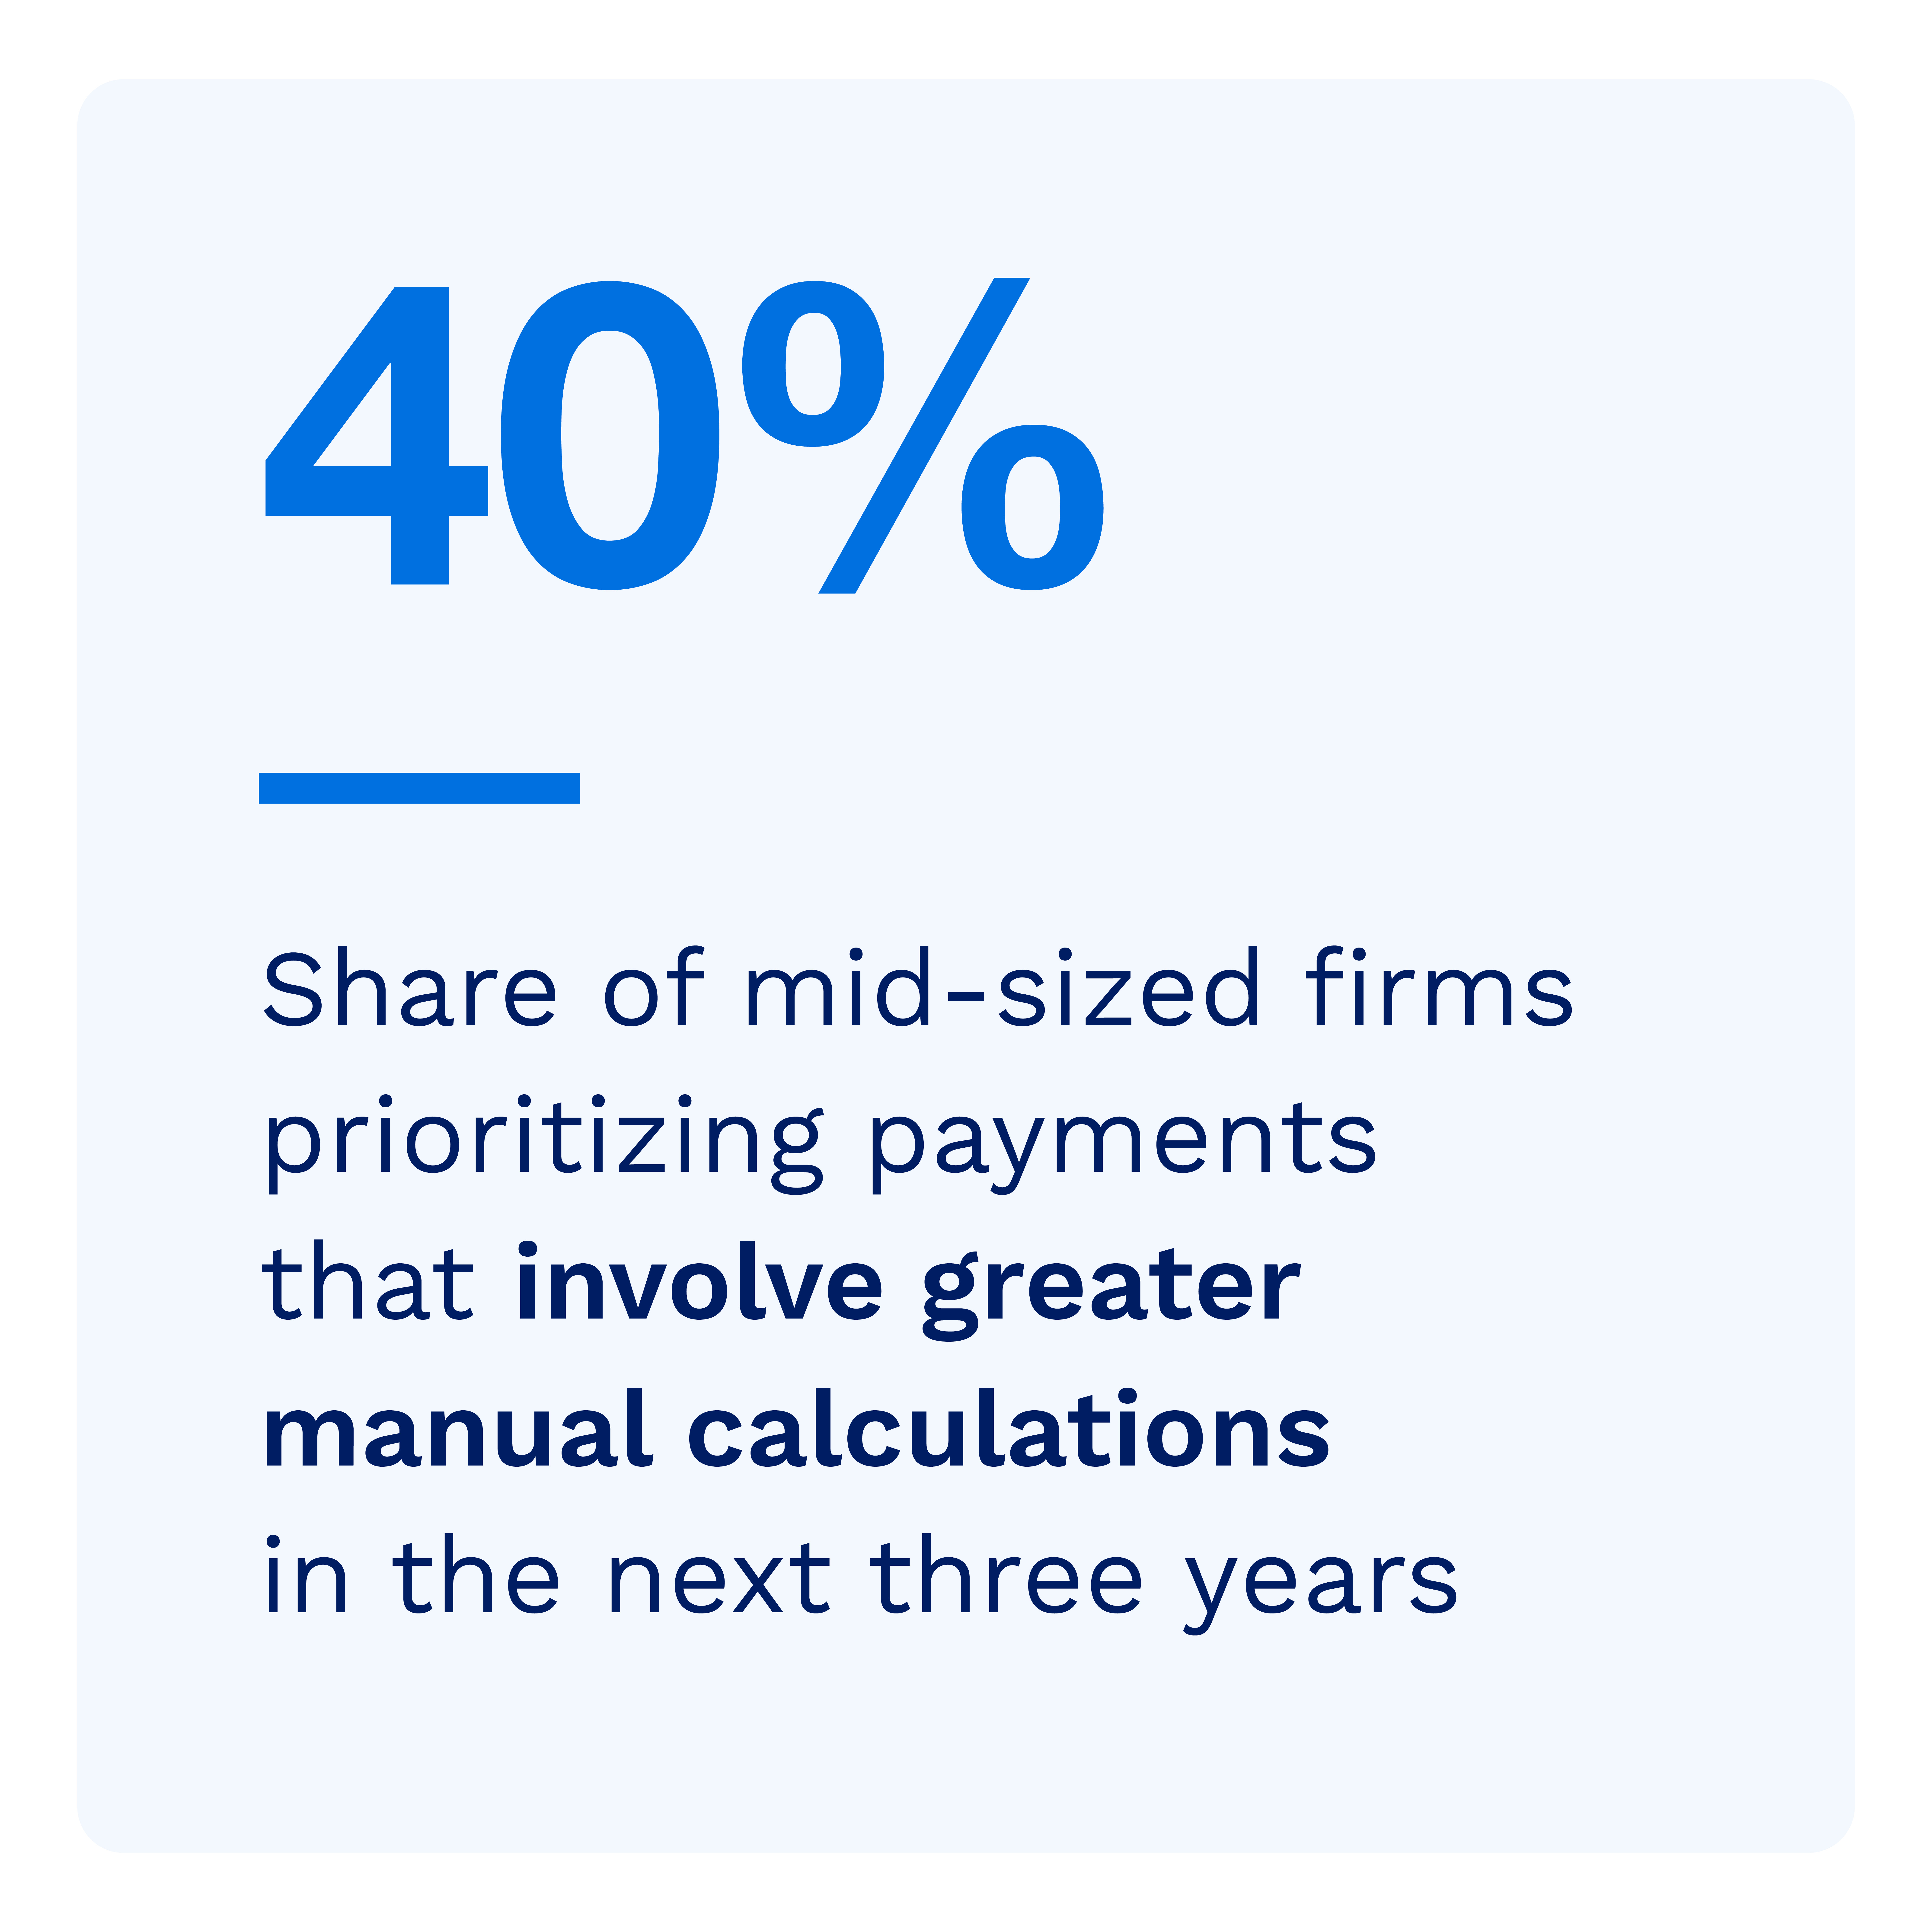 40%: Share of mid-sized firms prioritizing payments that involve greater manual calculations in the next three years